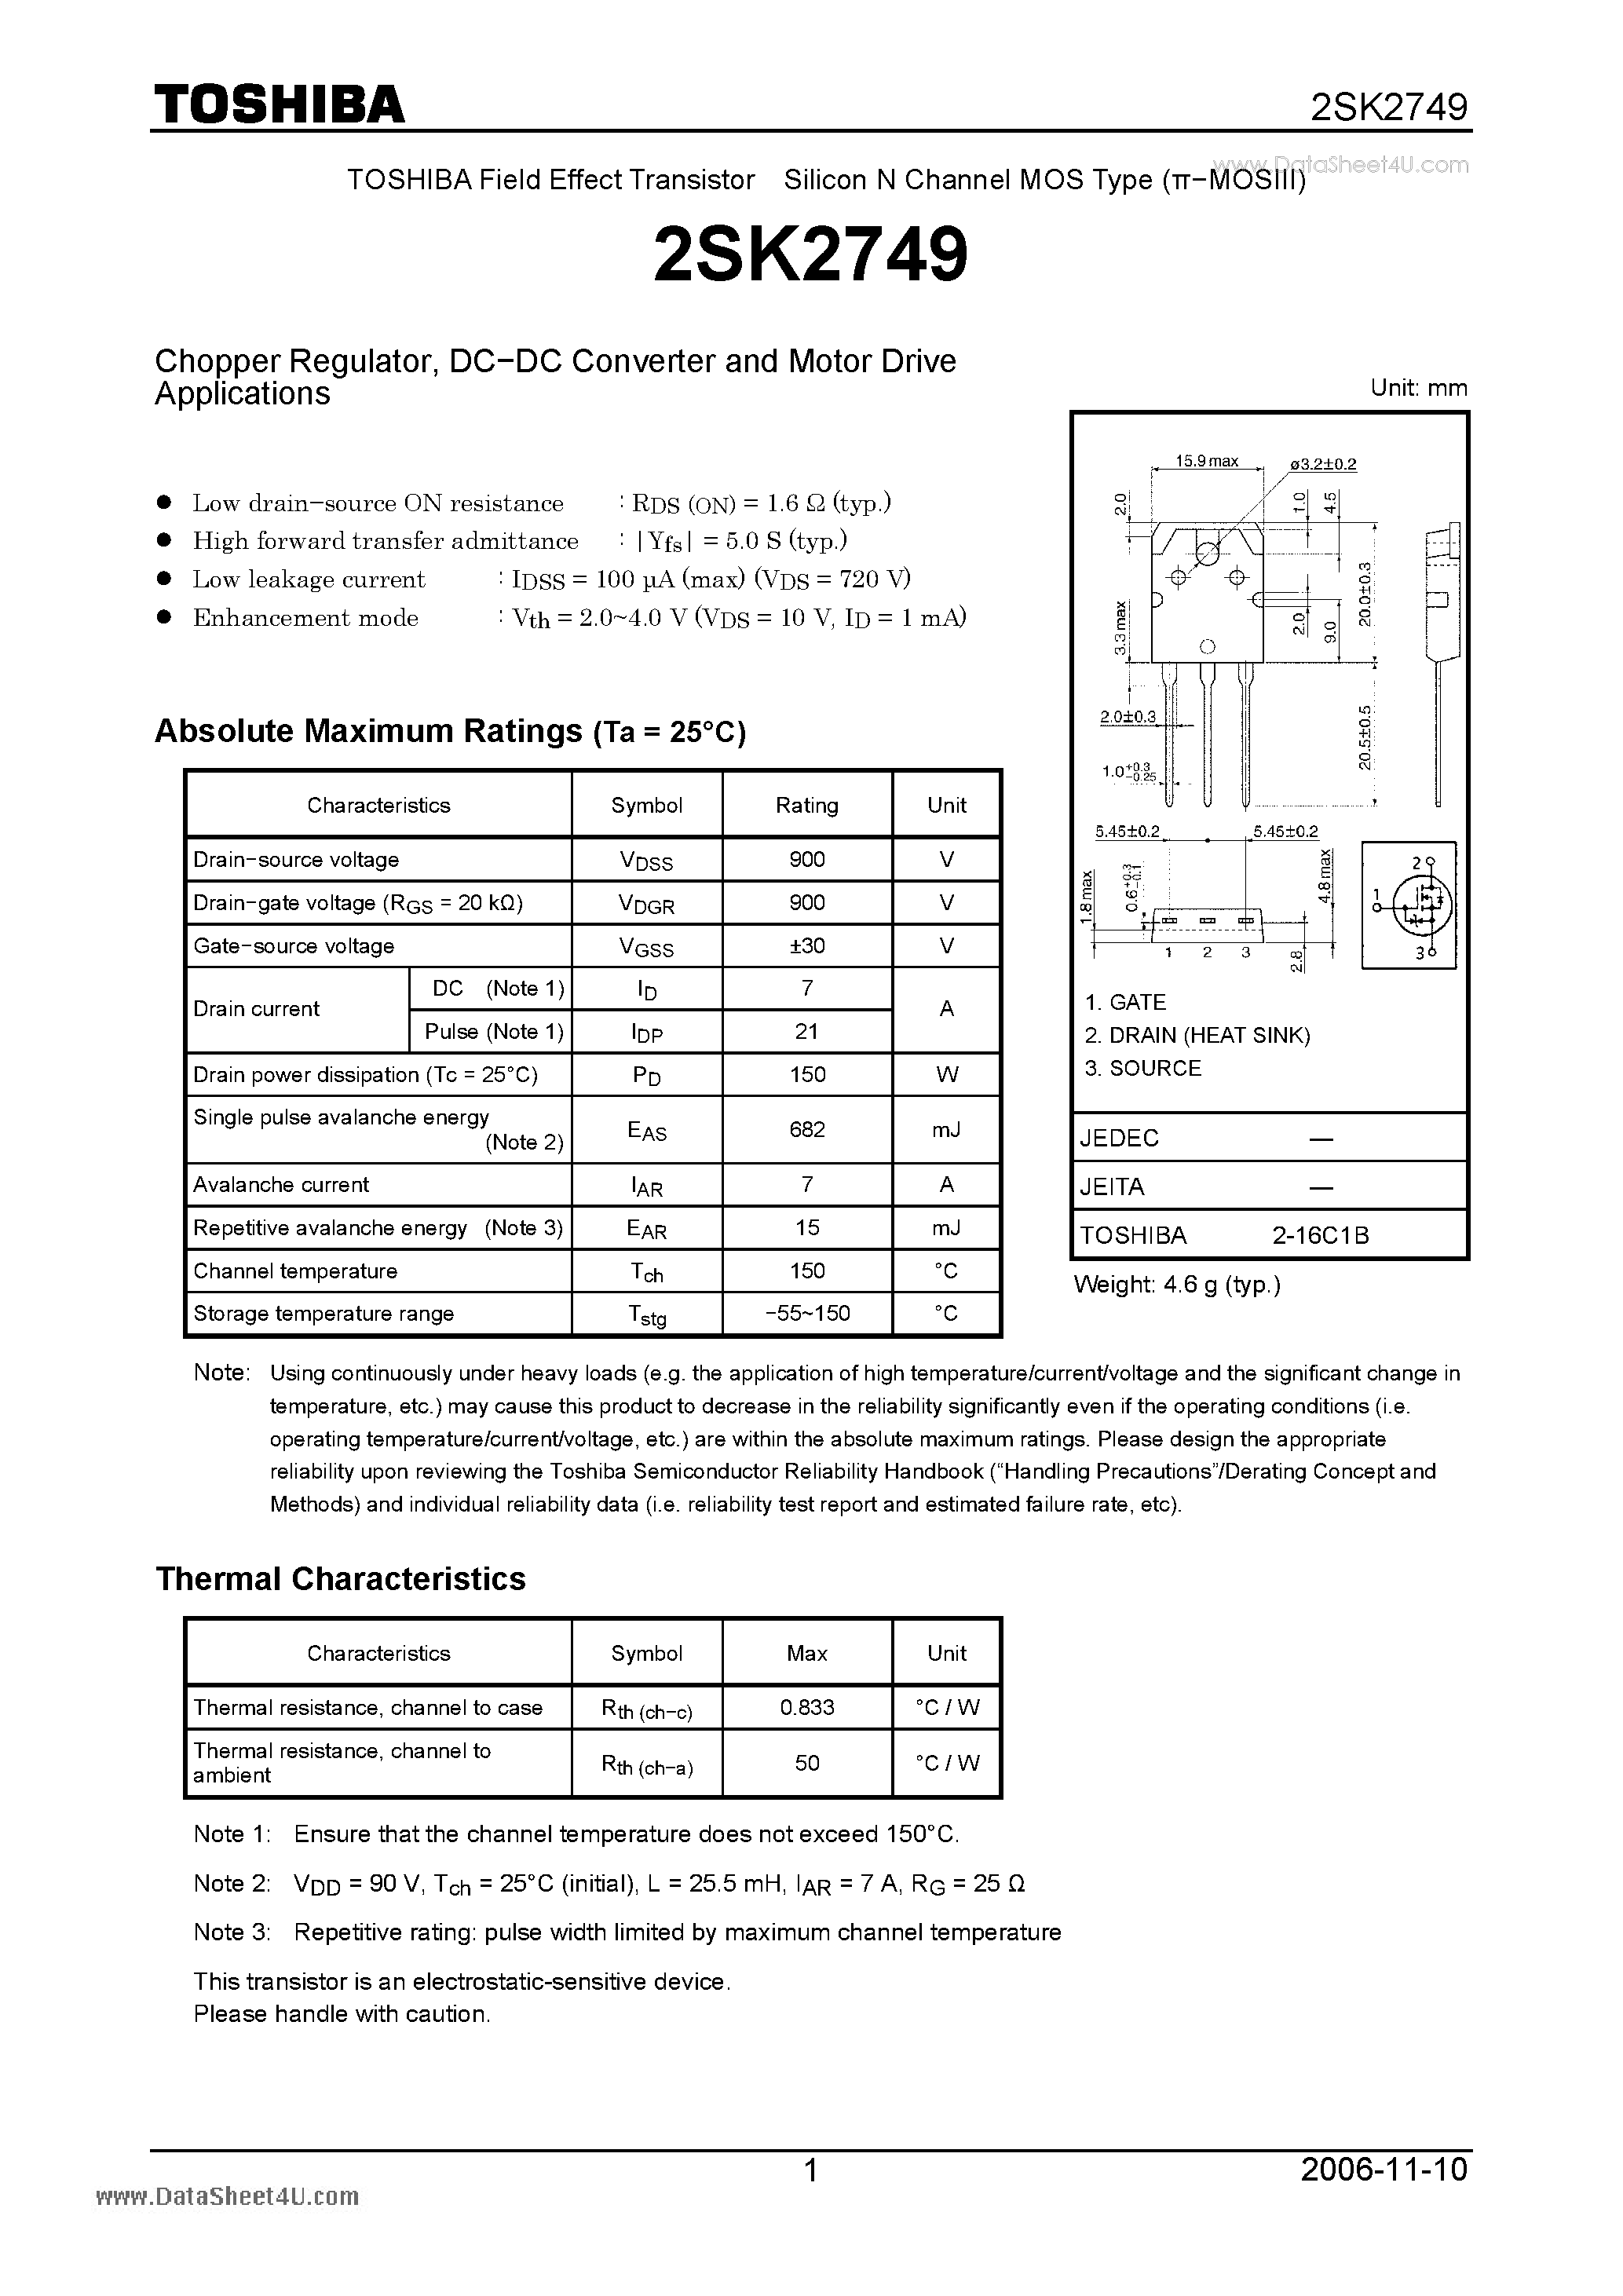 Datasheet K2749 - Search -----> 2SK2749 page 1